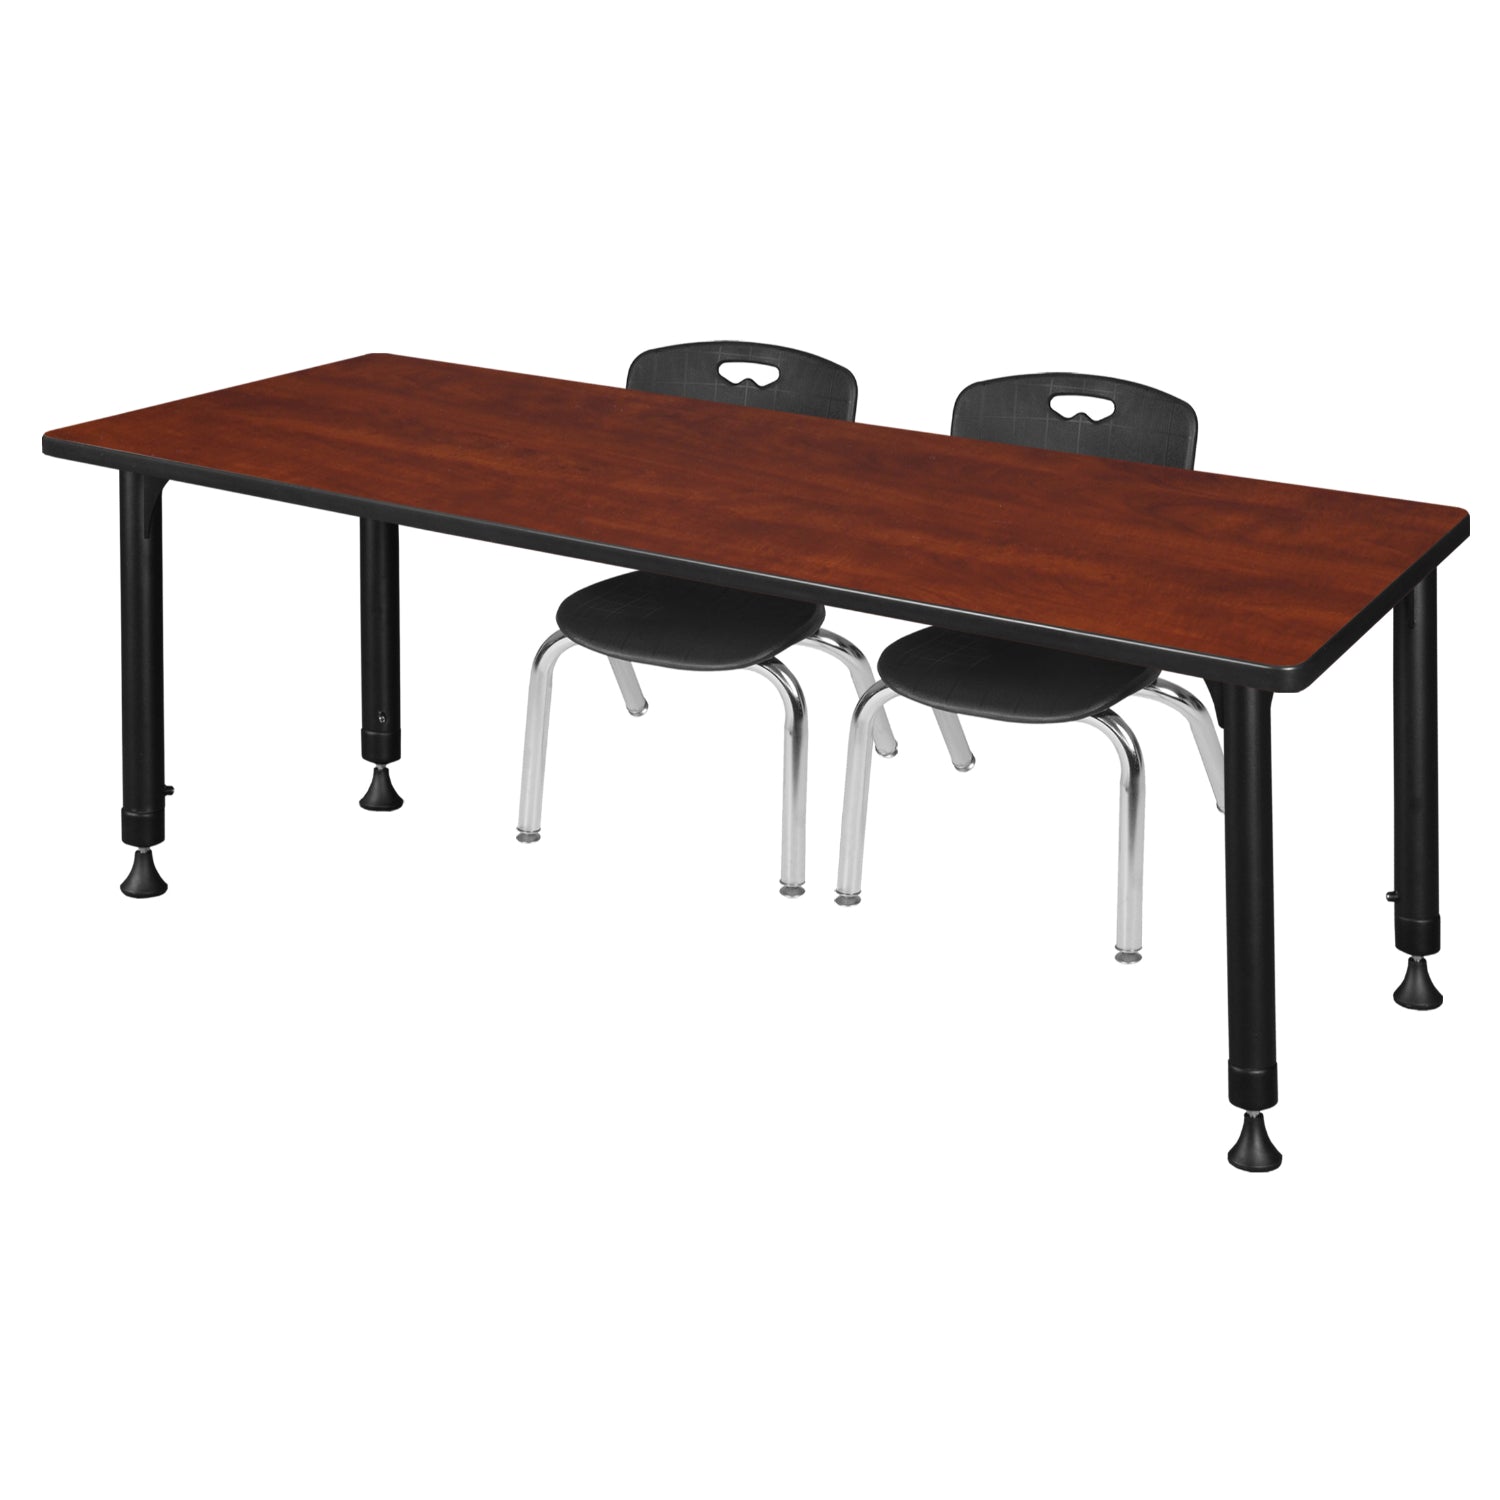 Kee Classroom Table and Chair Package, Kee 66" x 30" Rectangular Adjustable Height Table with 2 Andy 12" Stack Chairs